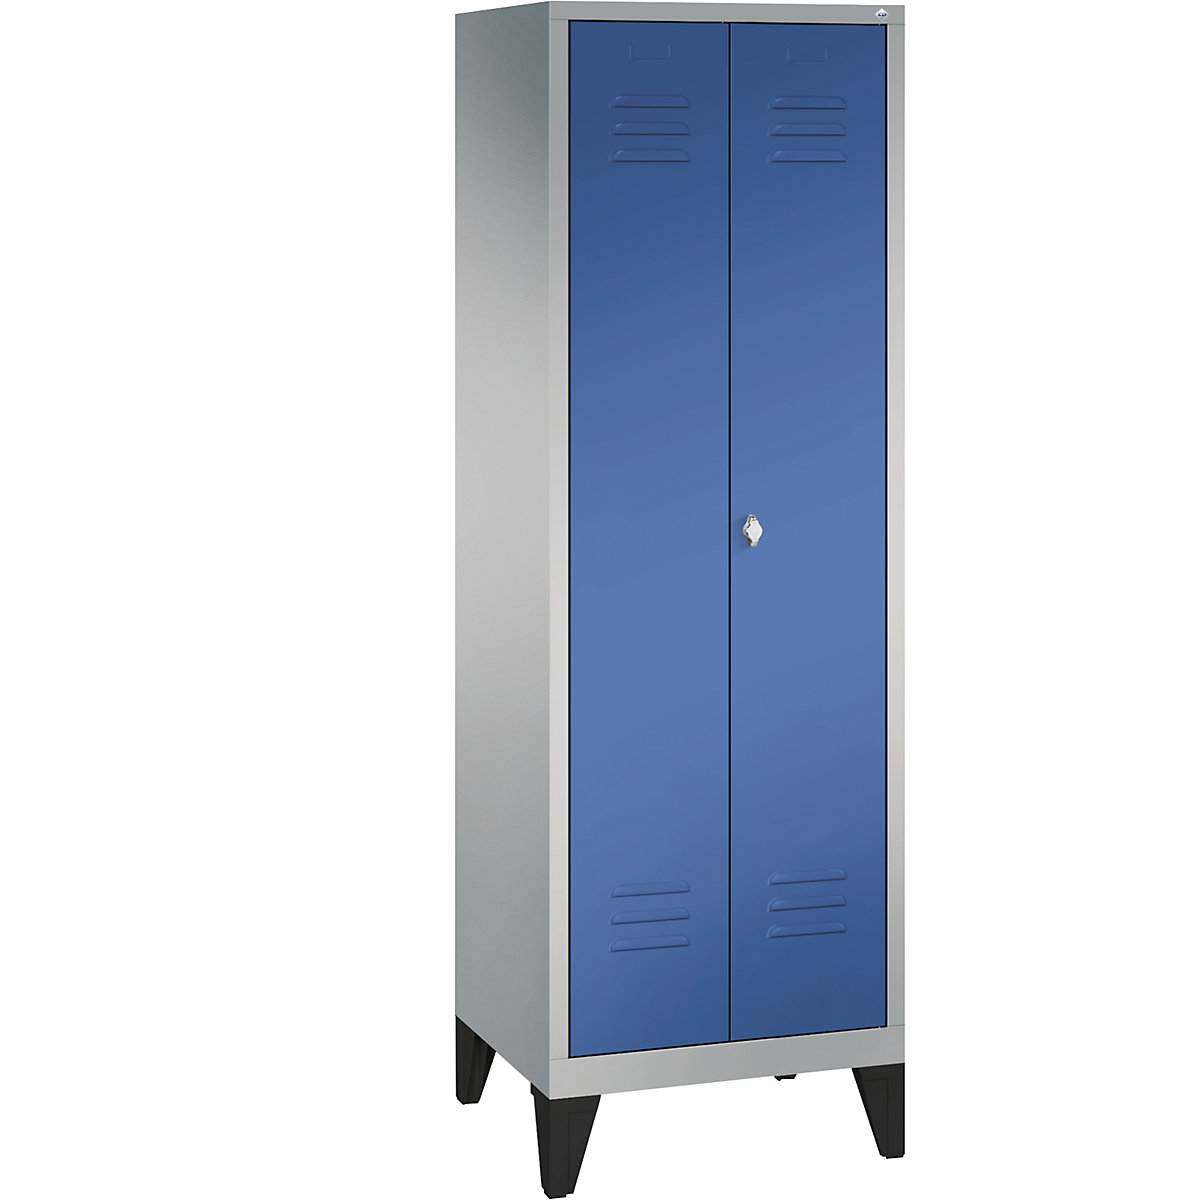 CLASSIC equipment cupboard with feet – C+P, 2 compartments, compartment width 300 mm, white aluminium / gentian blue-8